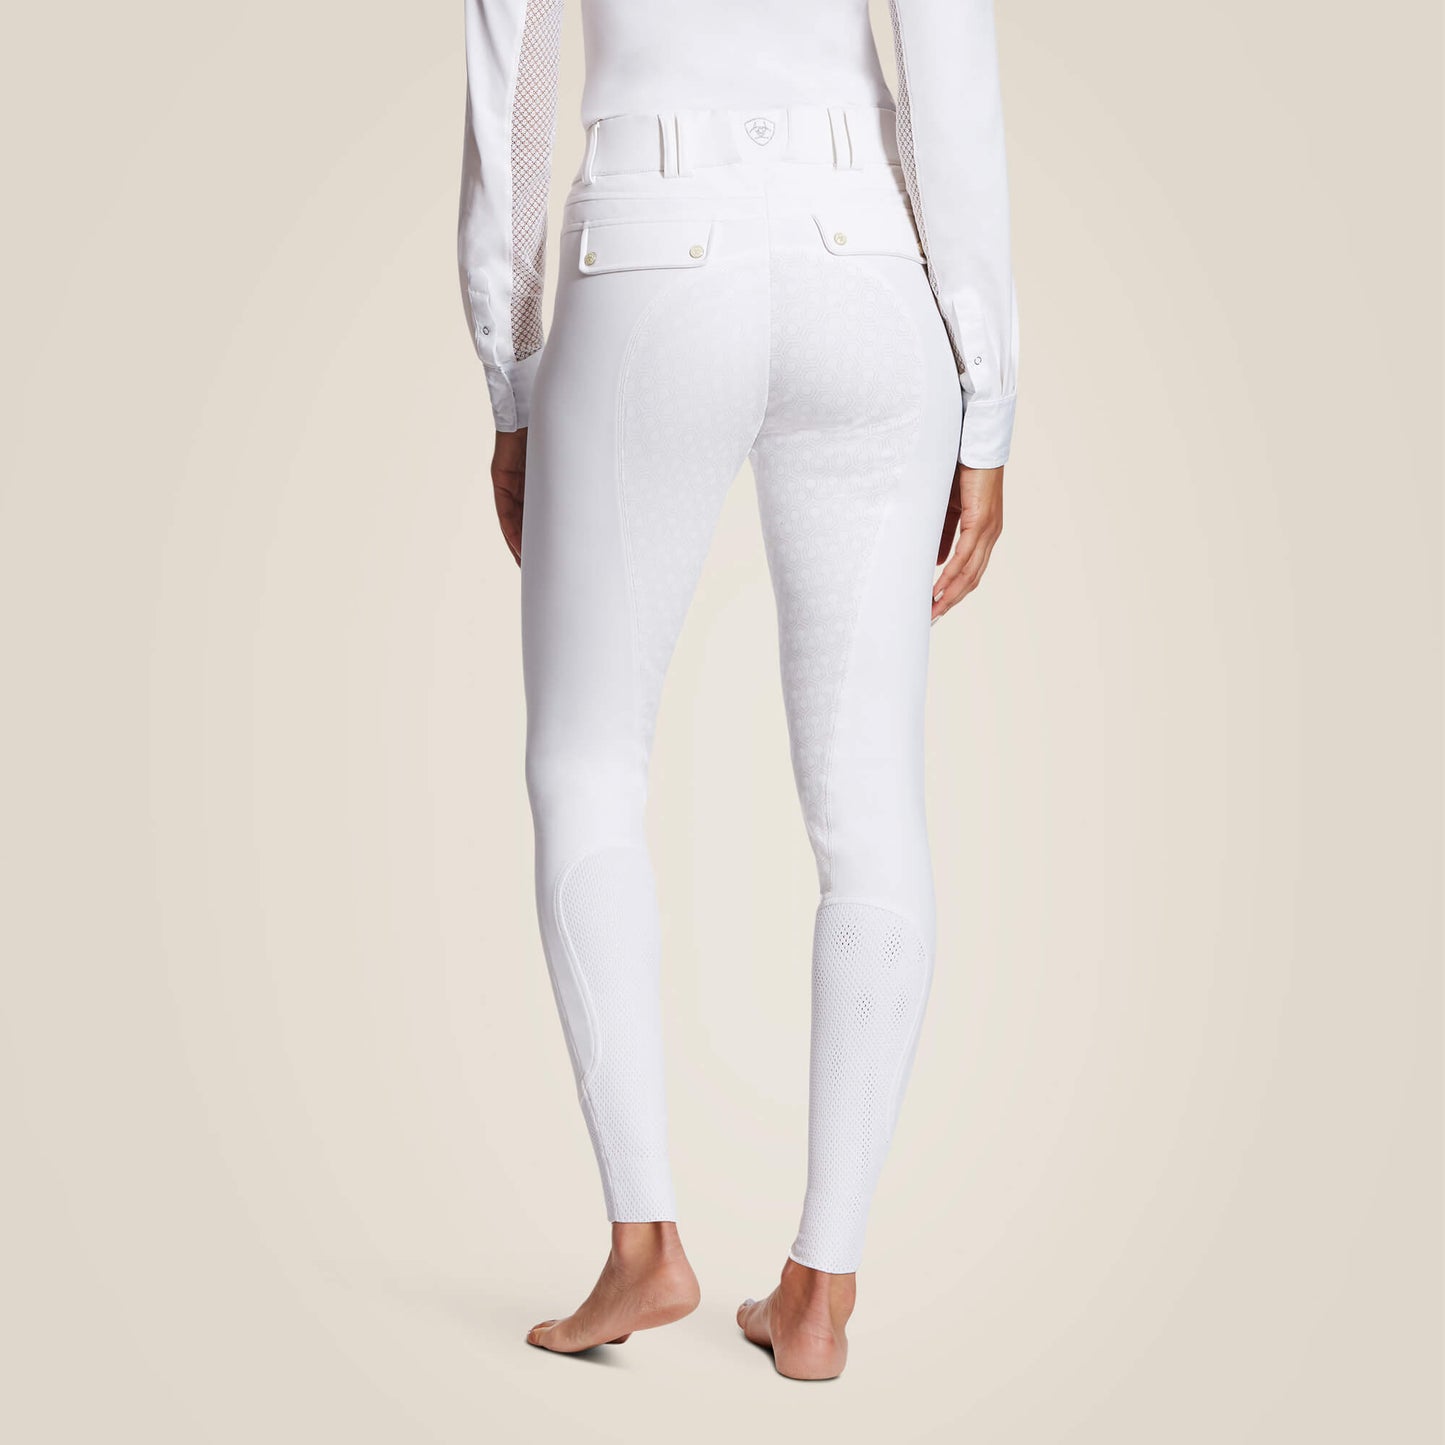 Ariat White Tri Factor Breeches with Full Silicone Grip